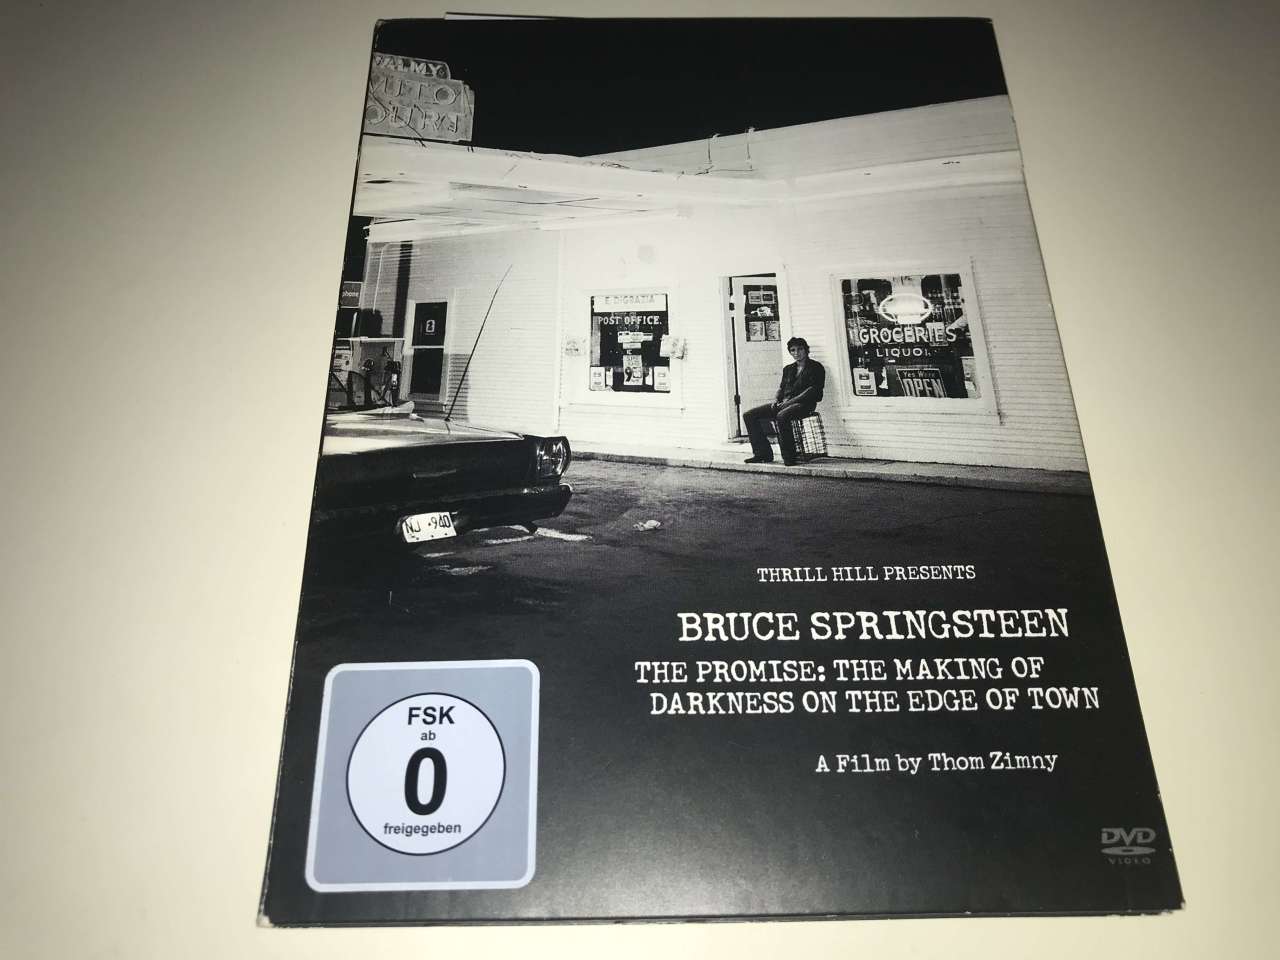 Bruce Springsteen – The Promise: The Making Of Darkness On The Edge Of Town